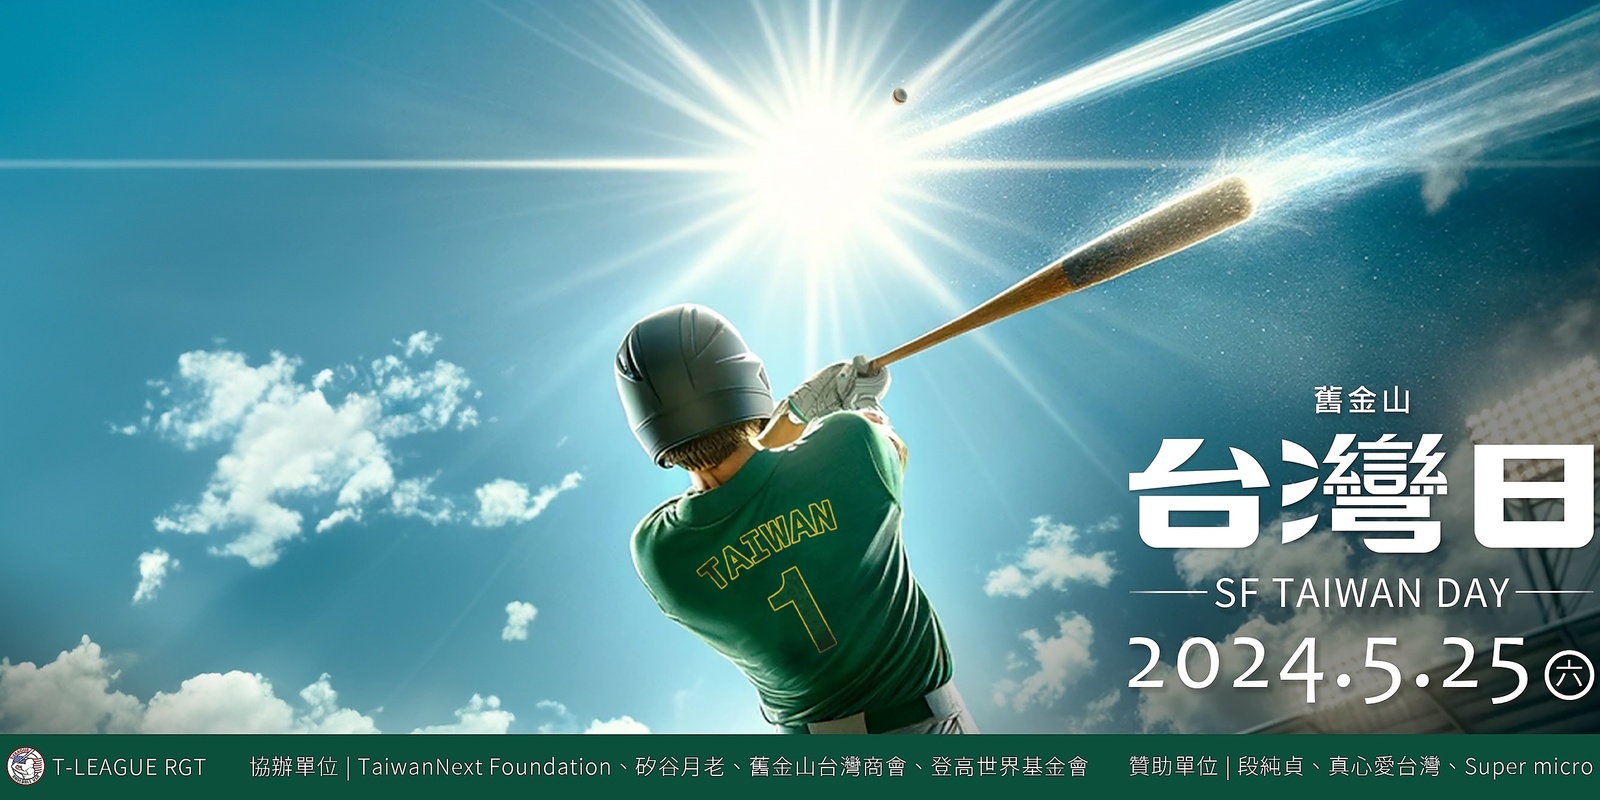 Banner image for 2024 舊金山台灣日 SF Taiwan Day 